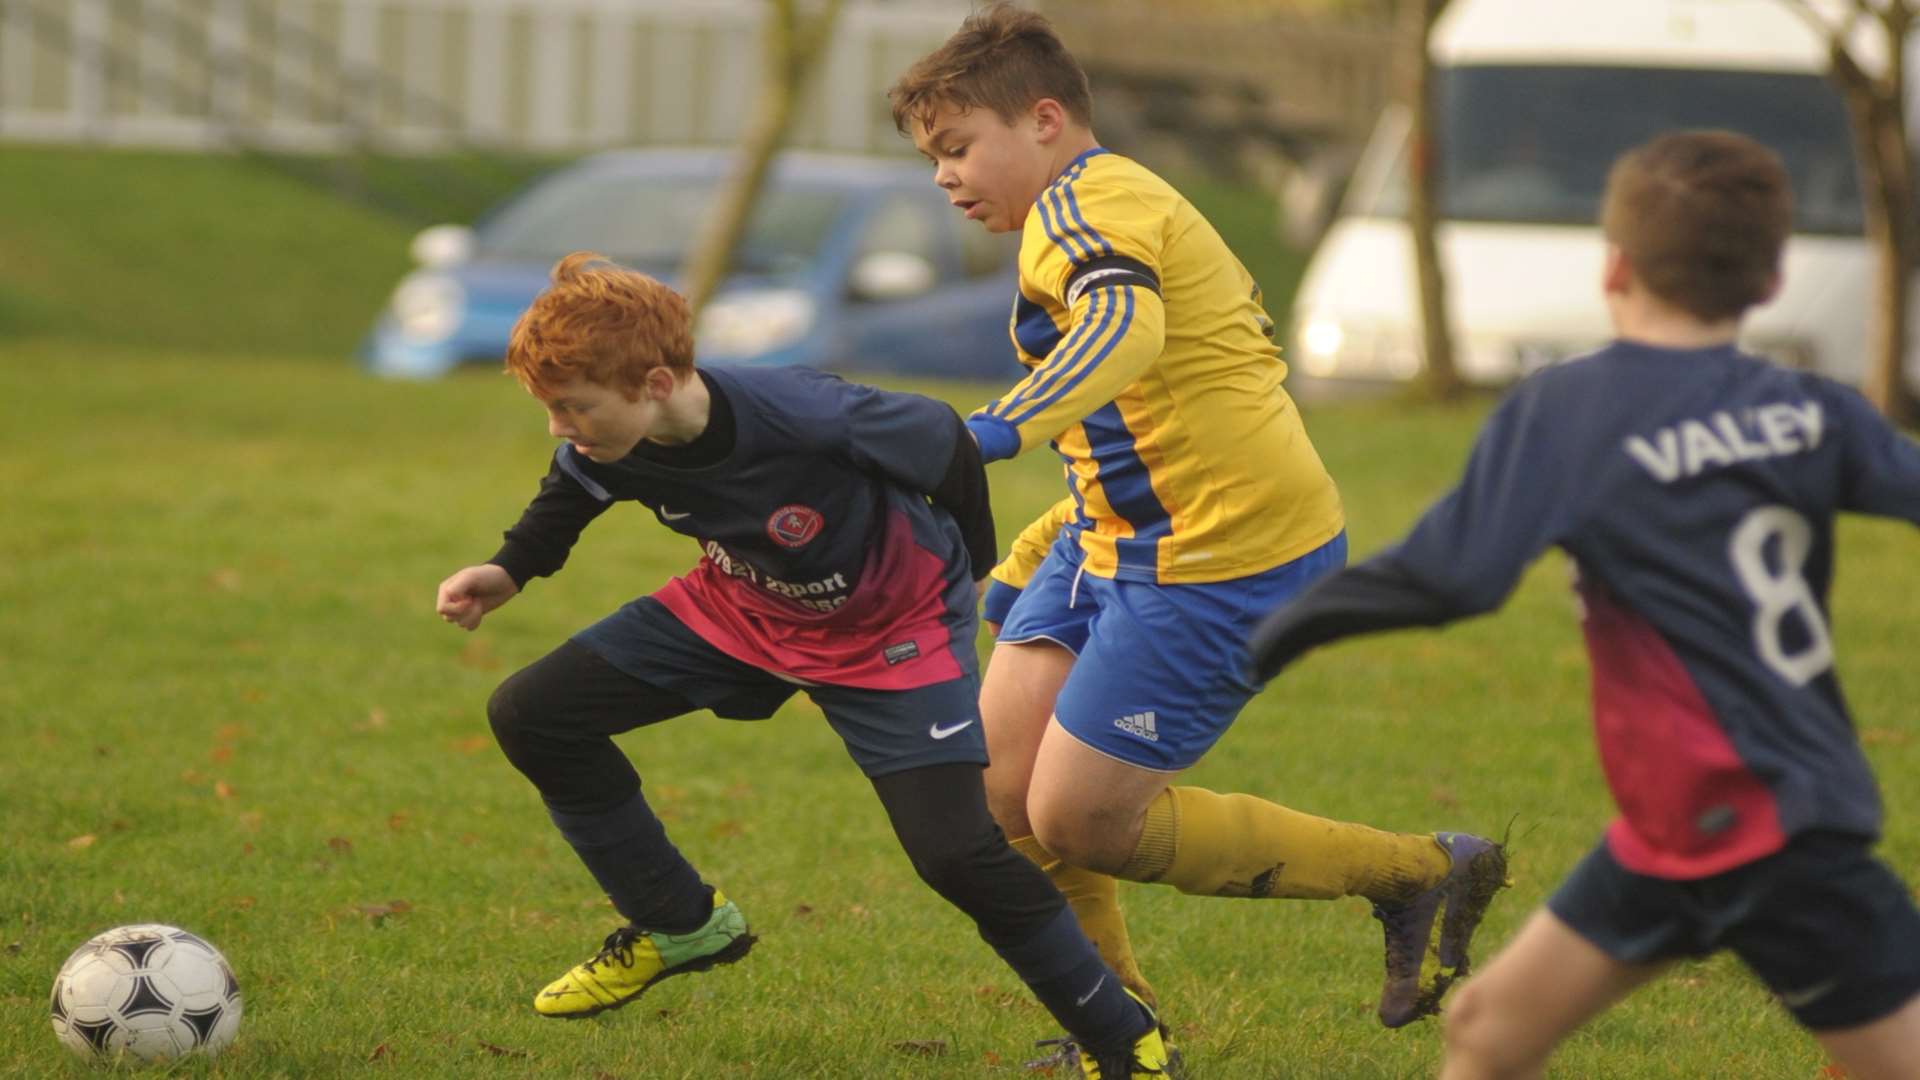 Strood 87, in yellow, give chase against Hempstead Valley in Under-12 Division 1 Picture: Steve Crispe